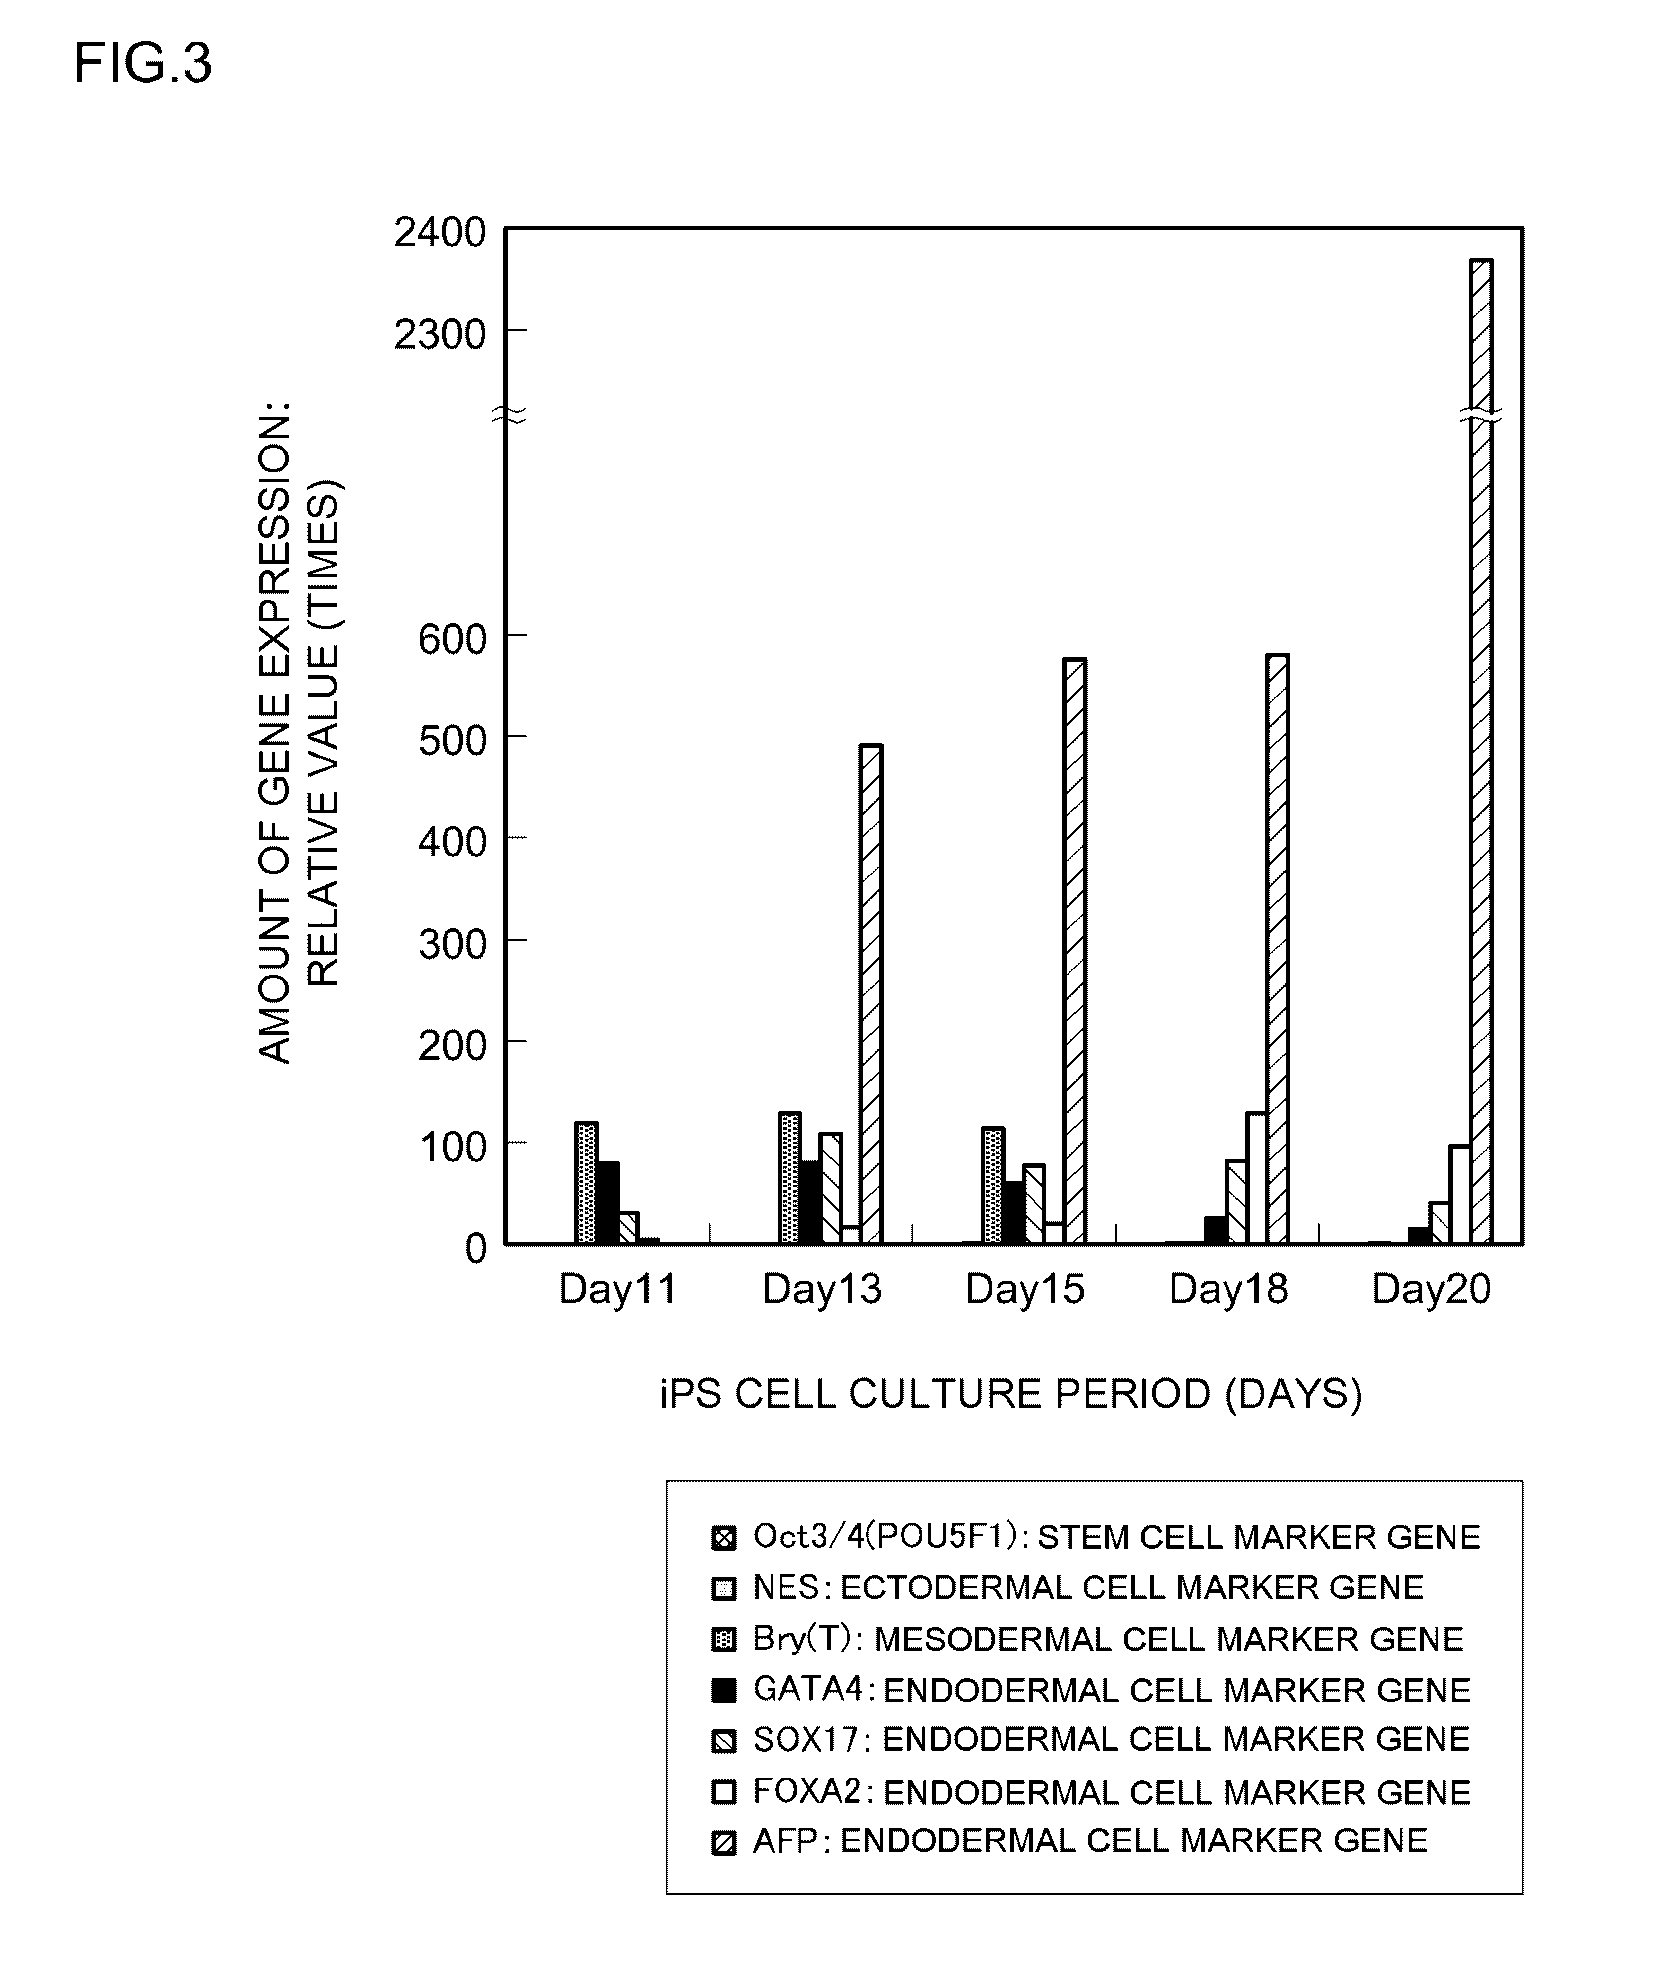 Method for inducing differentiation of pluripotent stem cells into endodermal cells